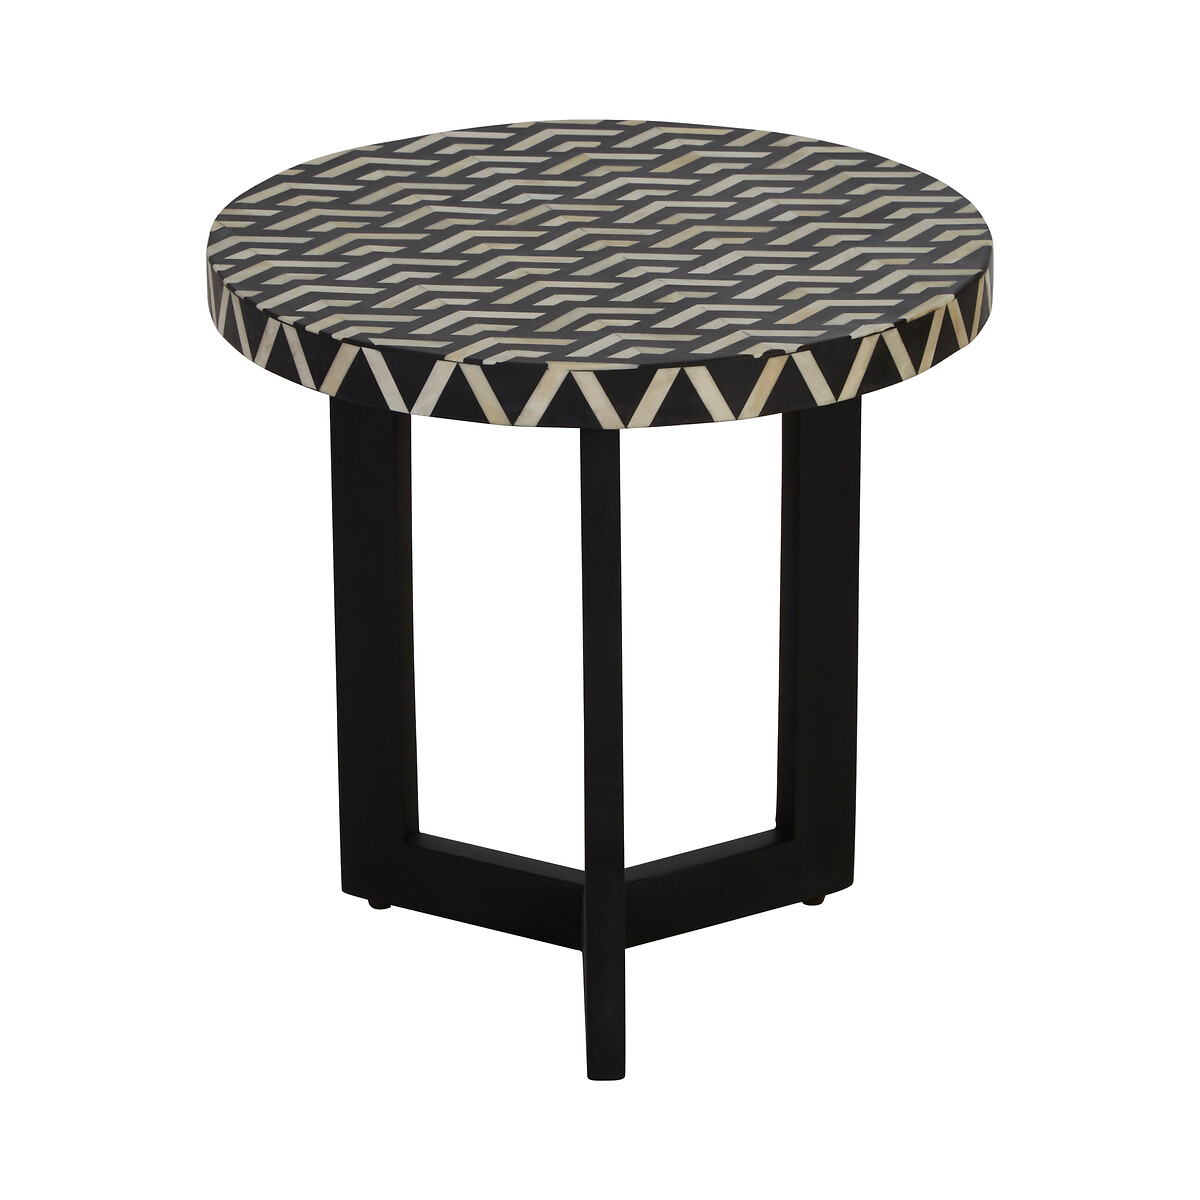 Boho Side Table With Bone Inlay Black, Black And White Bone Inlay Side Table